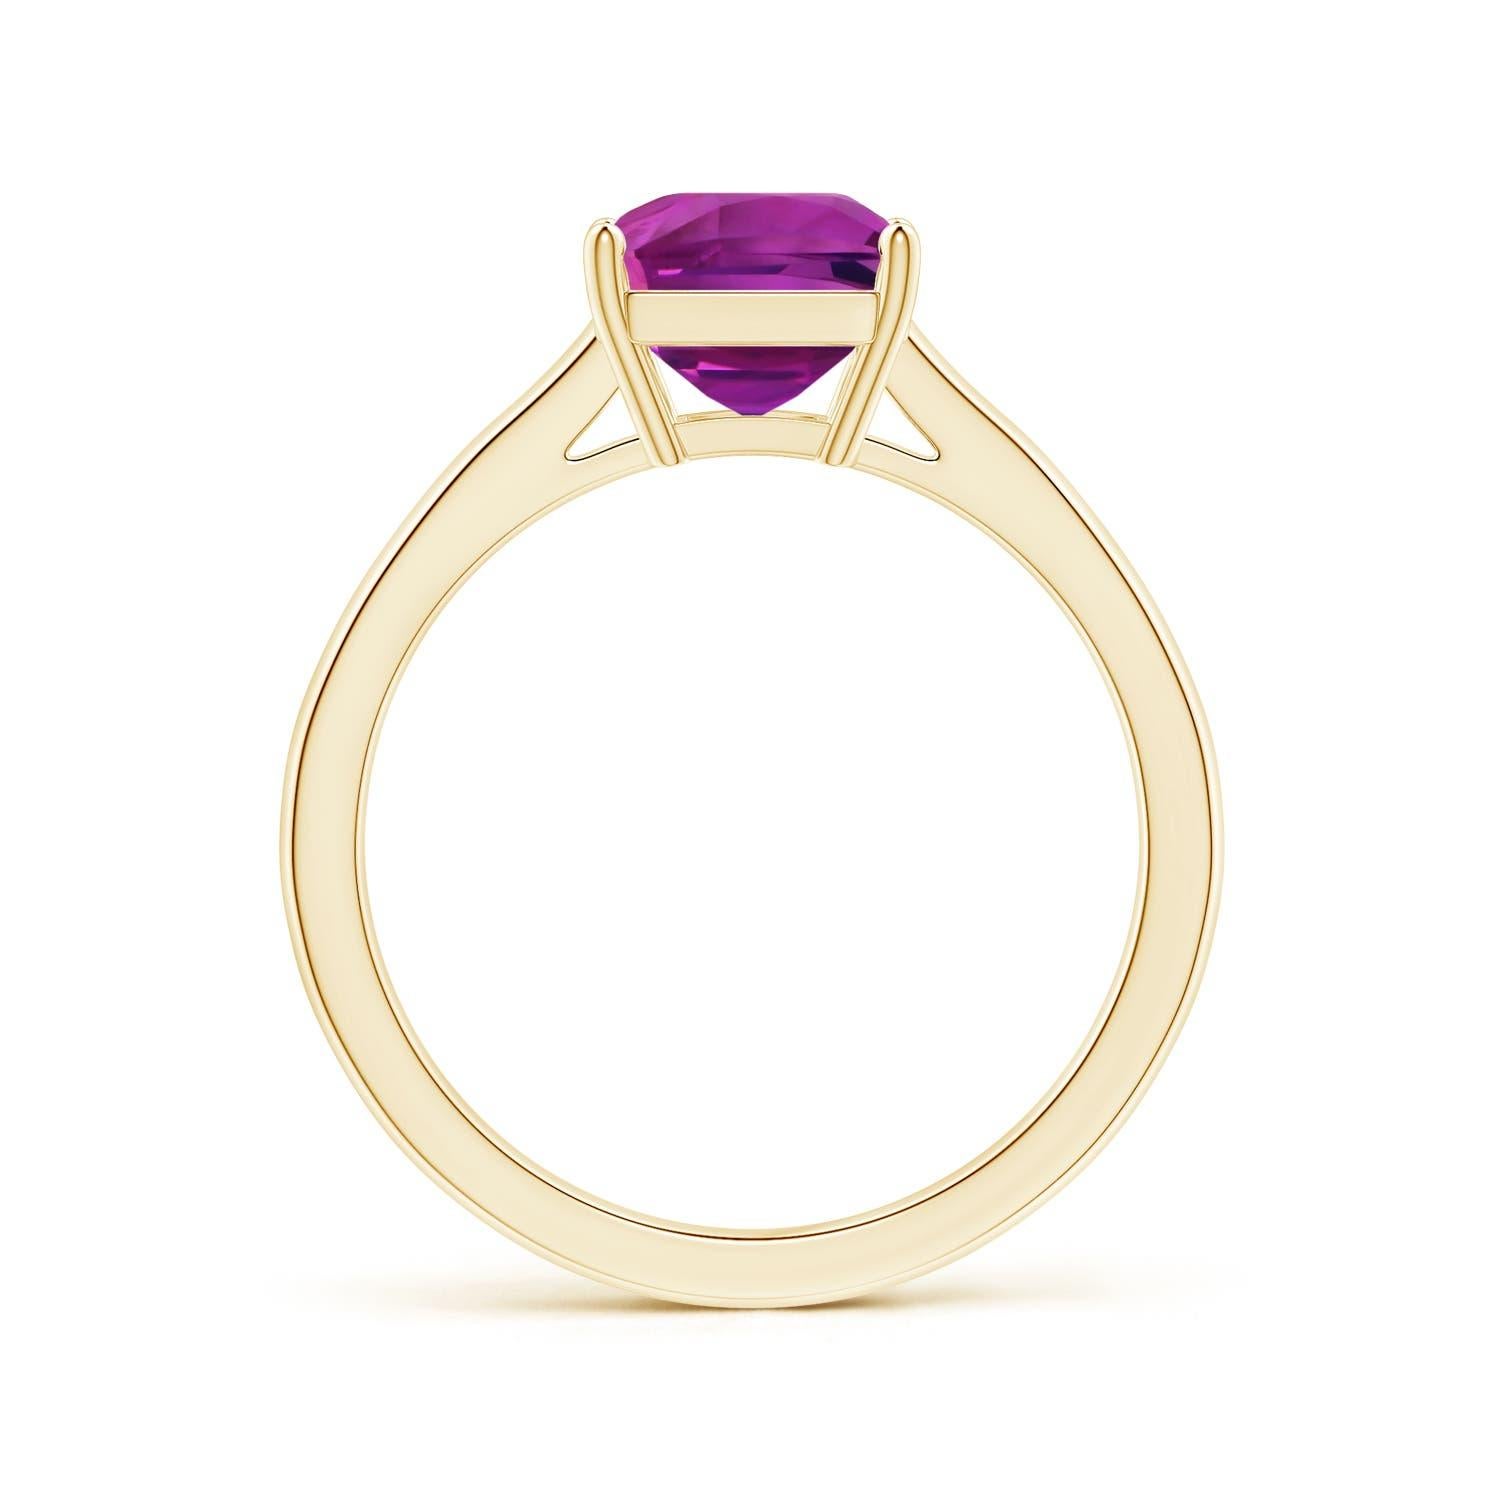 For Sale:  ANGARA GIA Certified Emerald-Cut Pink Sapphire Solitaire Ring in Yellow Gold 2